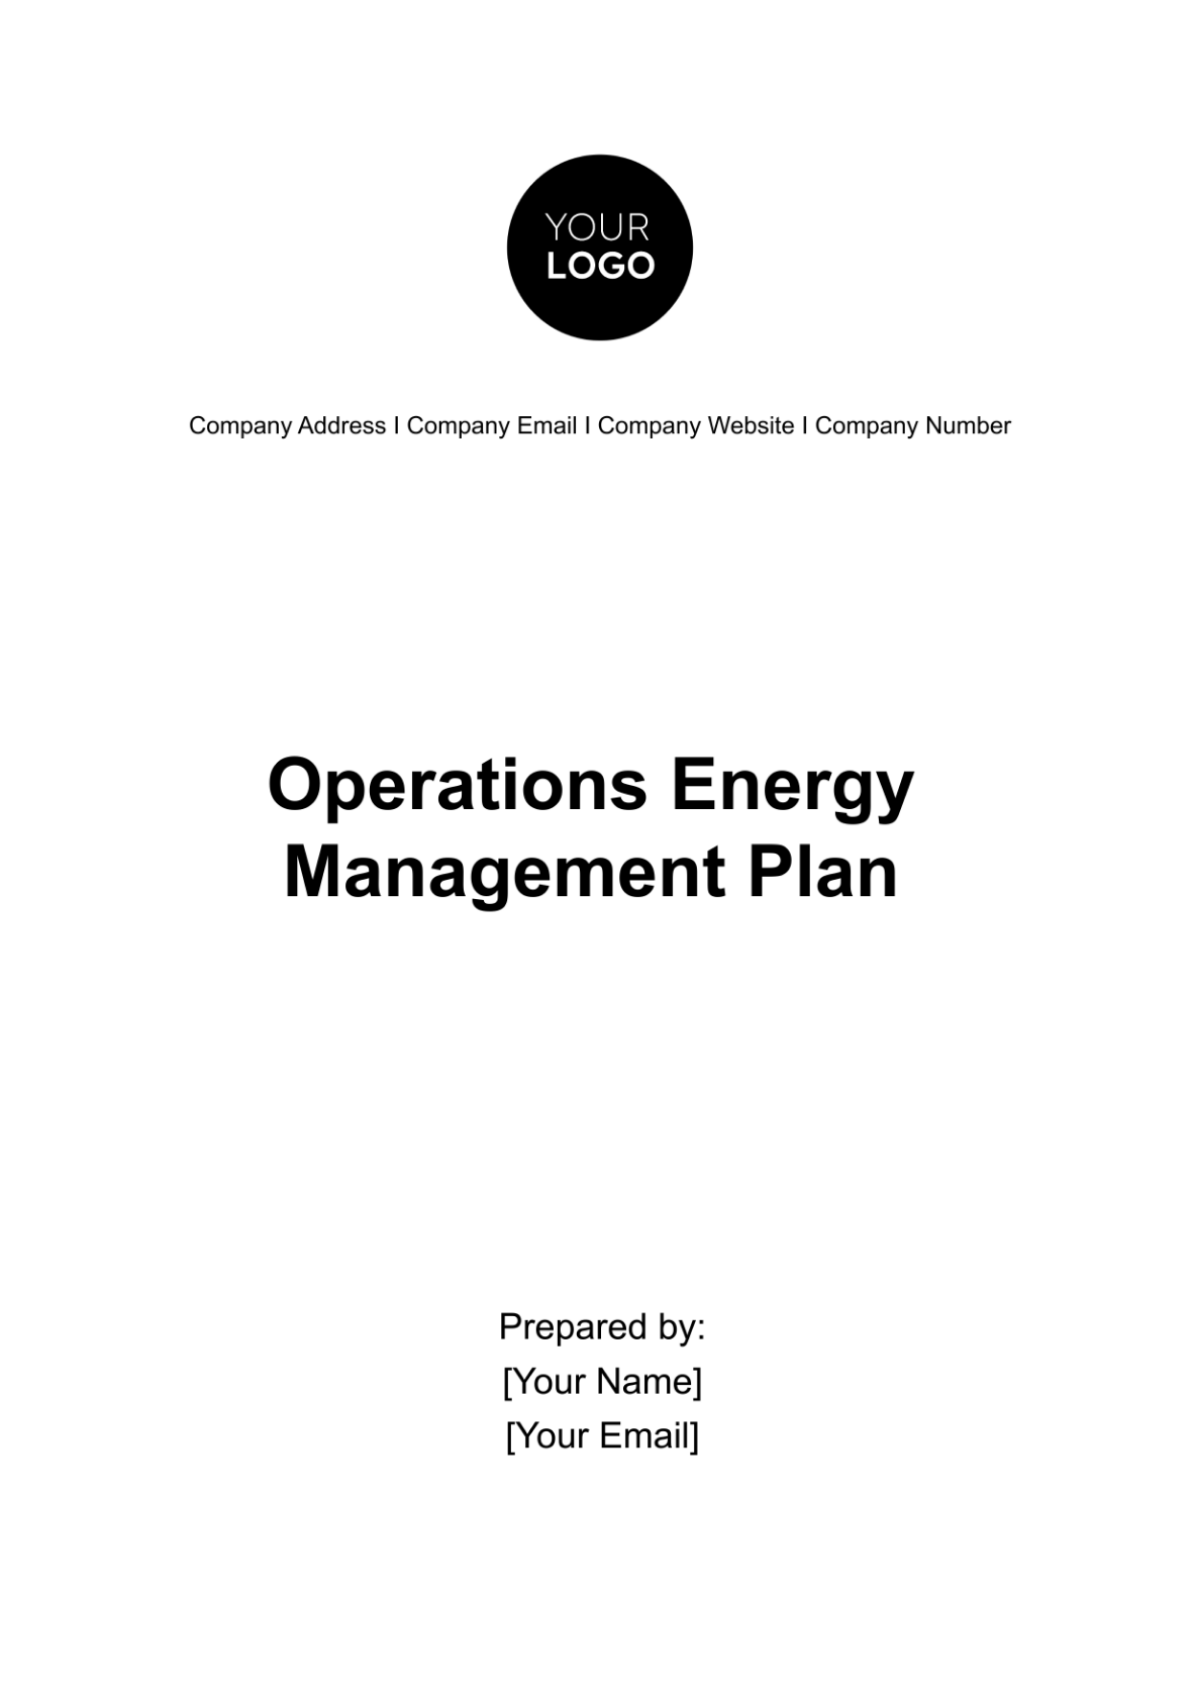 Operations Energy Management Plan Template